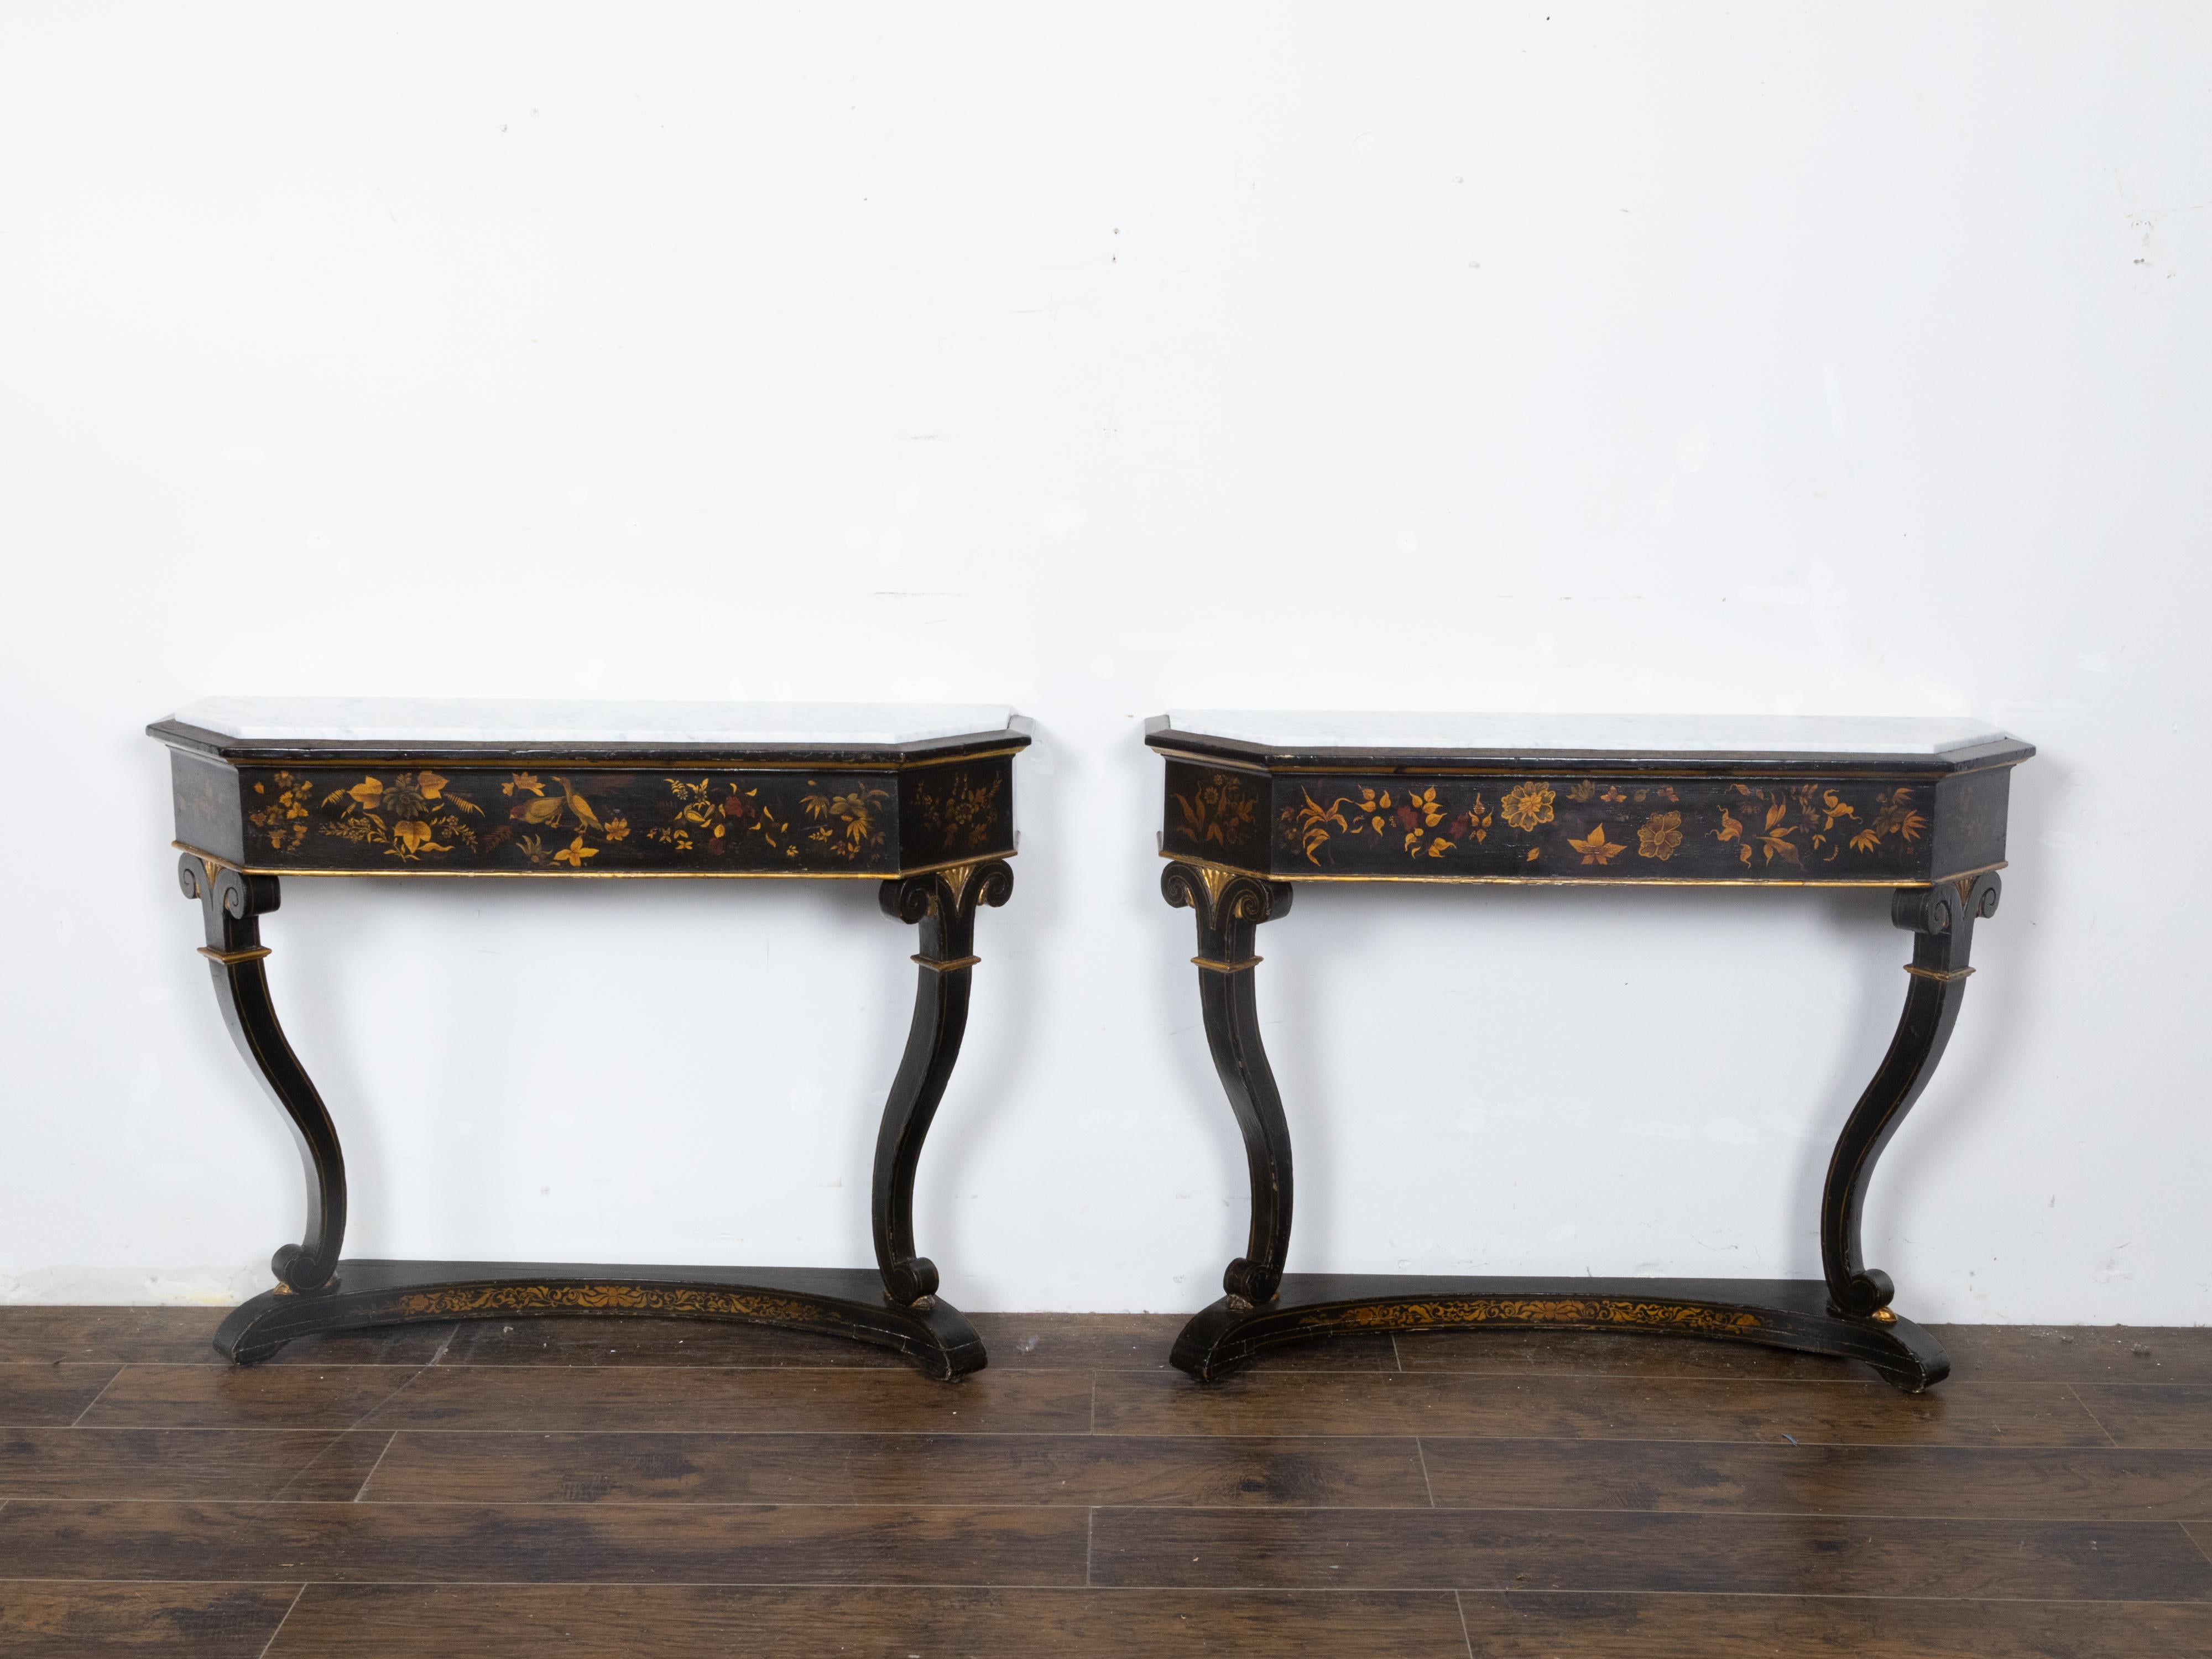 A pair of English Chinoiserie black and gold console tables from the 19th century with white marble tops. Embrace the exquisite fusion of East and West with this pair of English Chinoiserie black and gold console tables from the 19th century, pieces